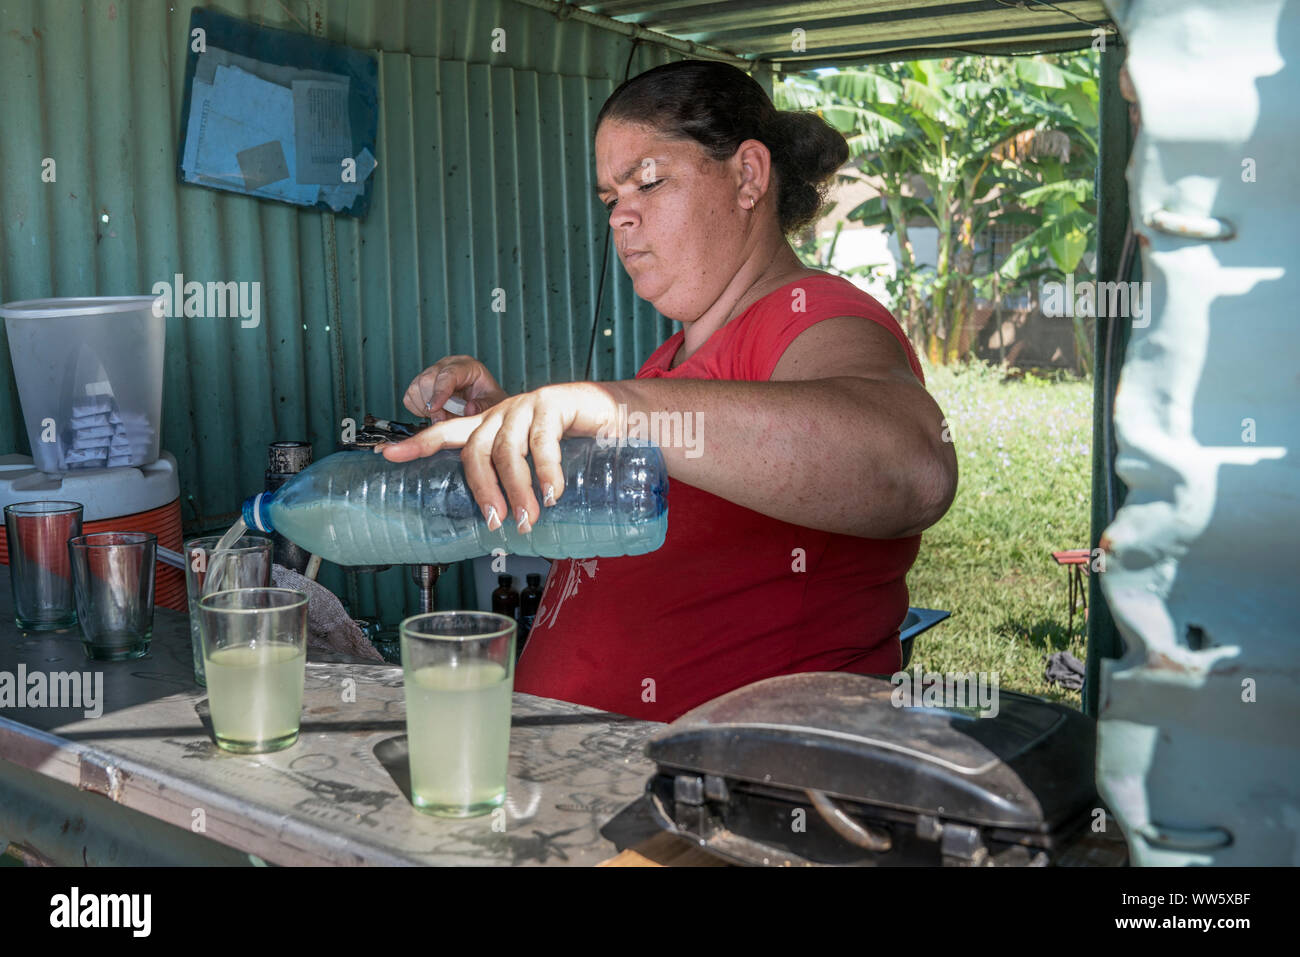 Kiosk with refreshments and snacks on the way to Trinidad, a woman pouring in lemonade Stock Photo